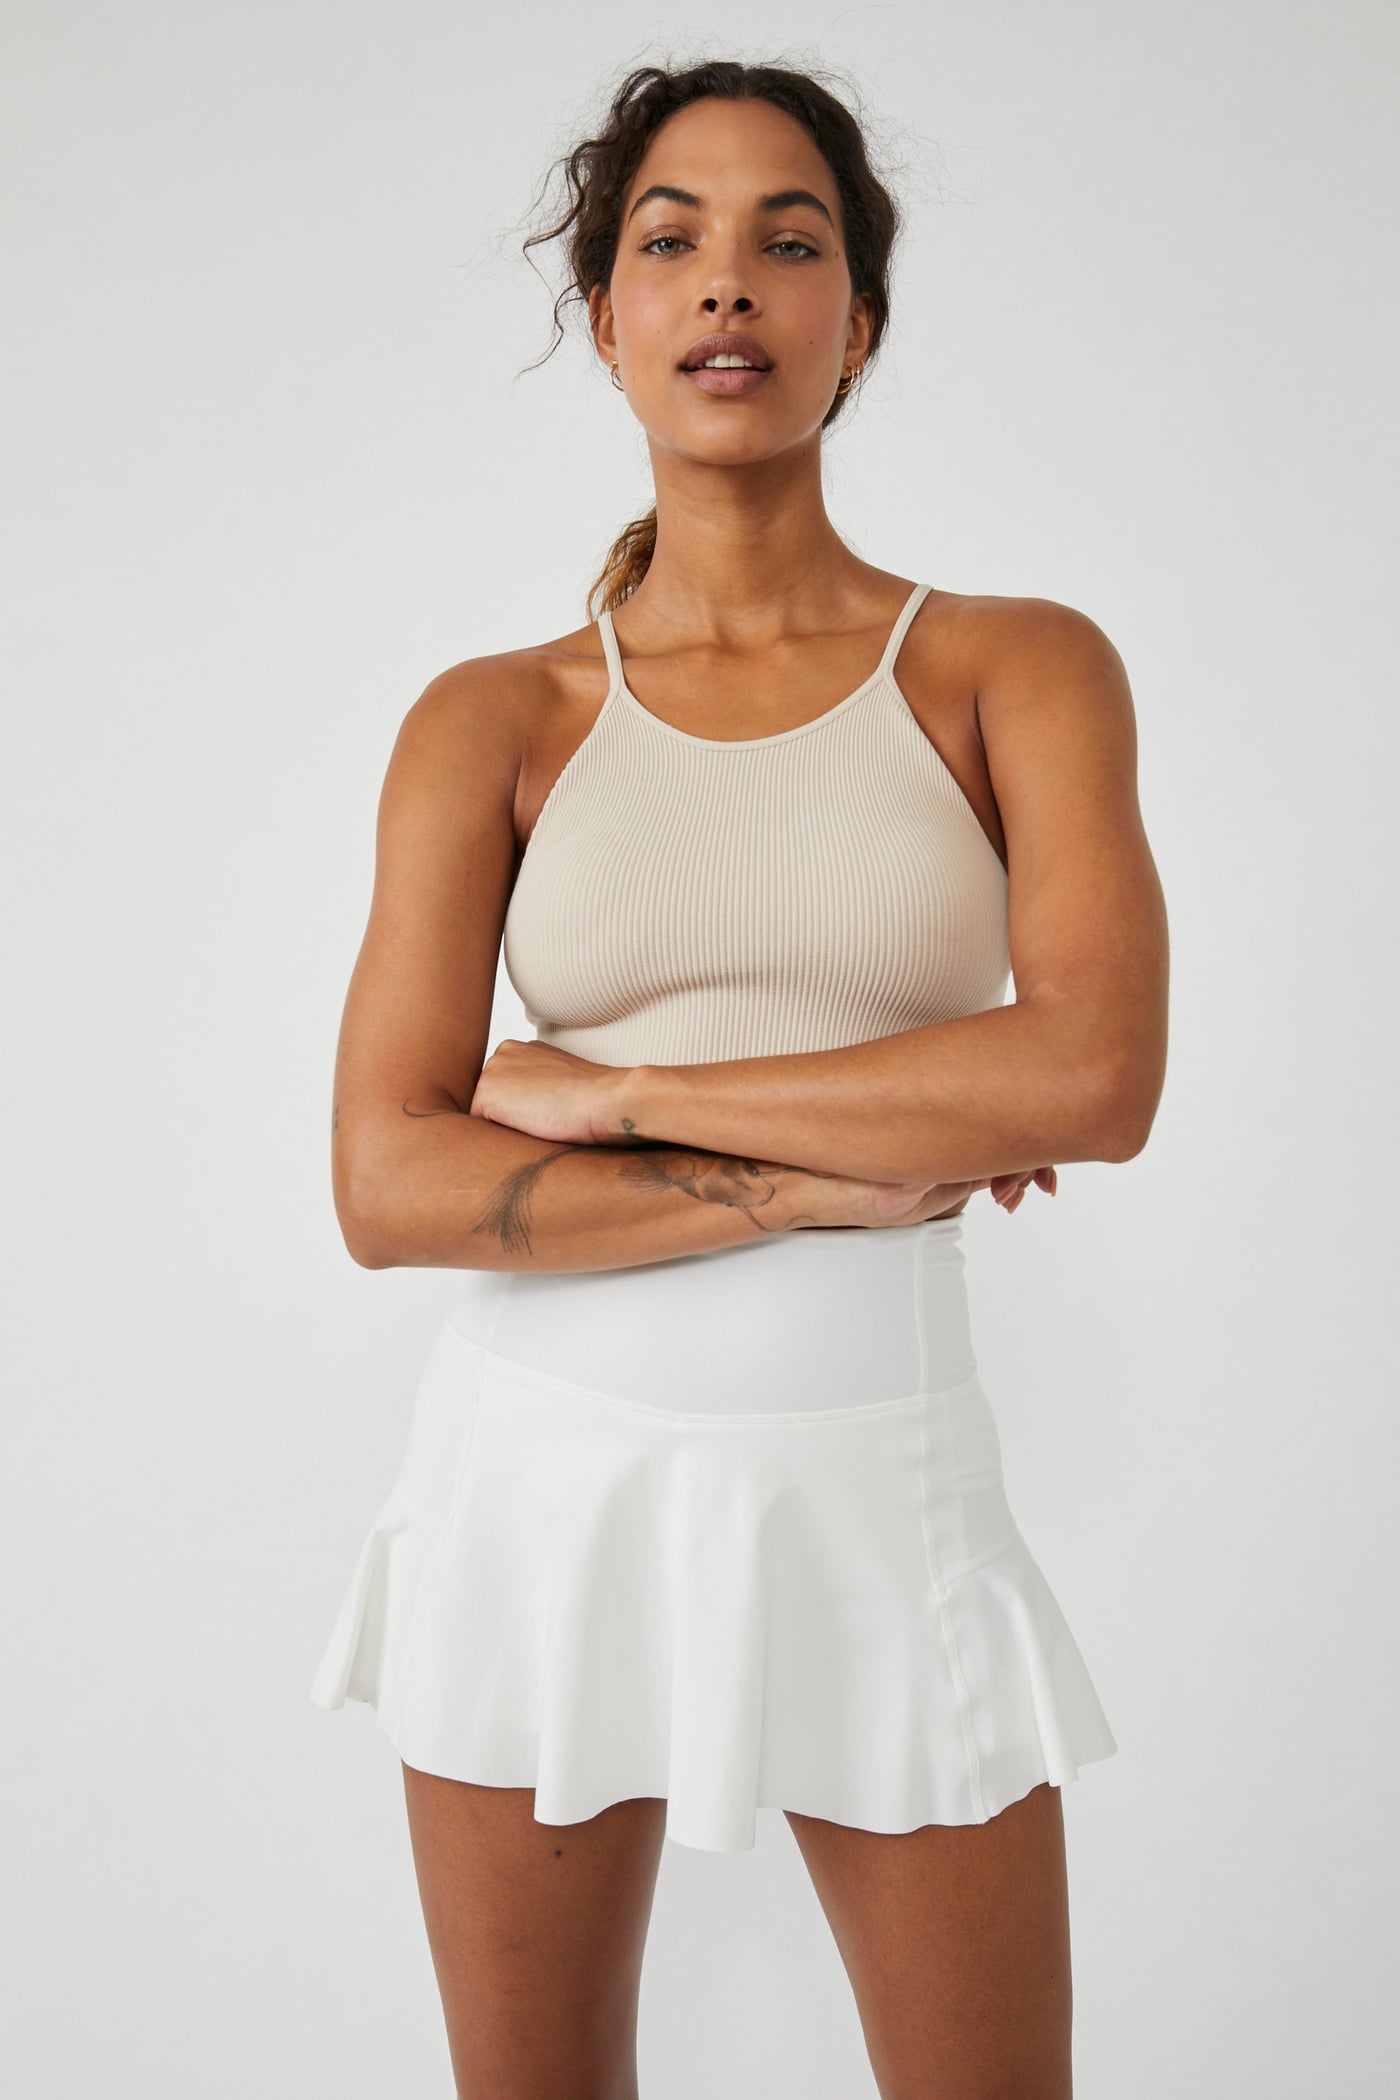 Check Out My Topspin Skirt - White